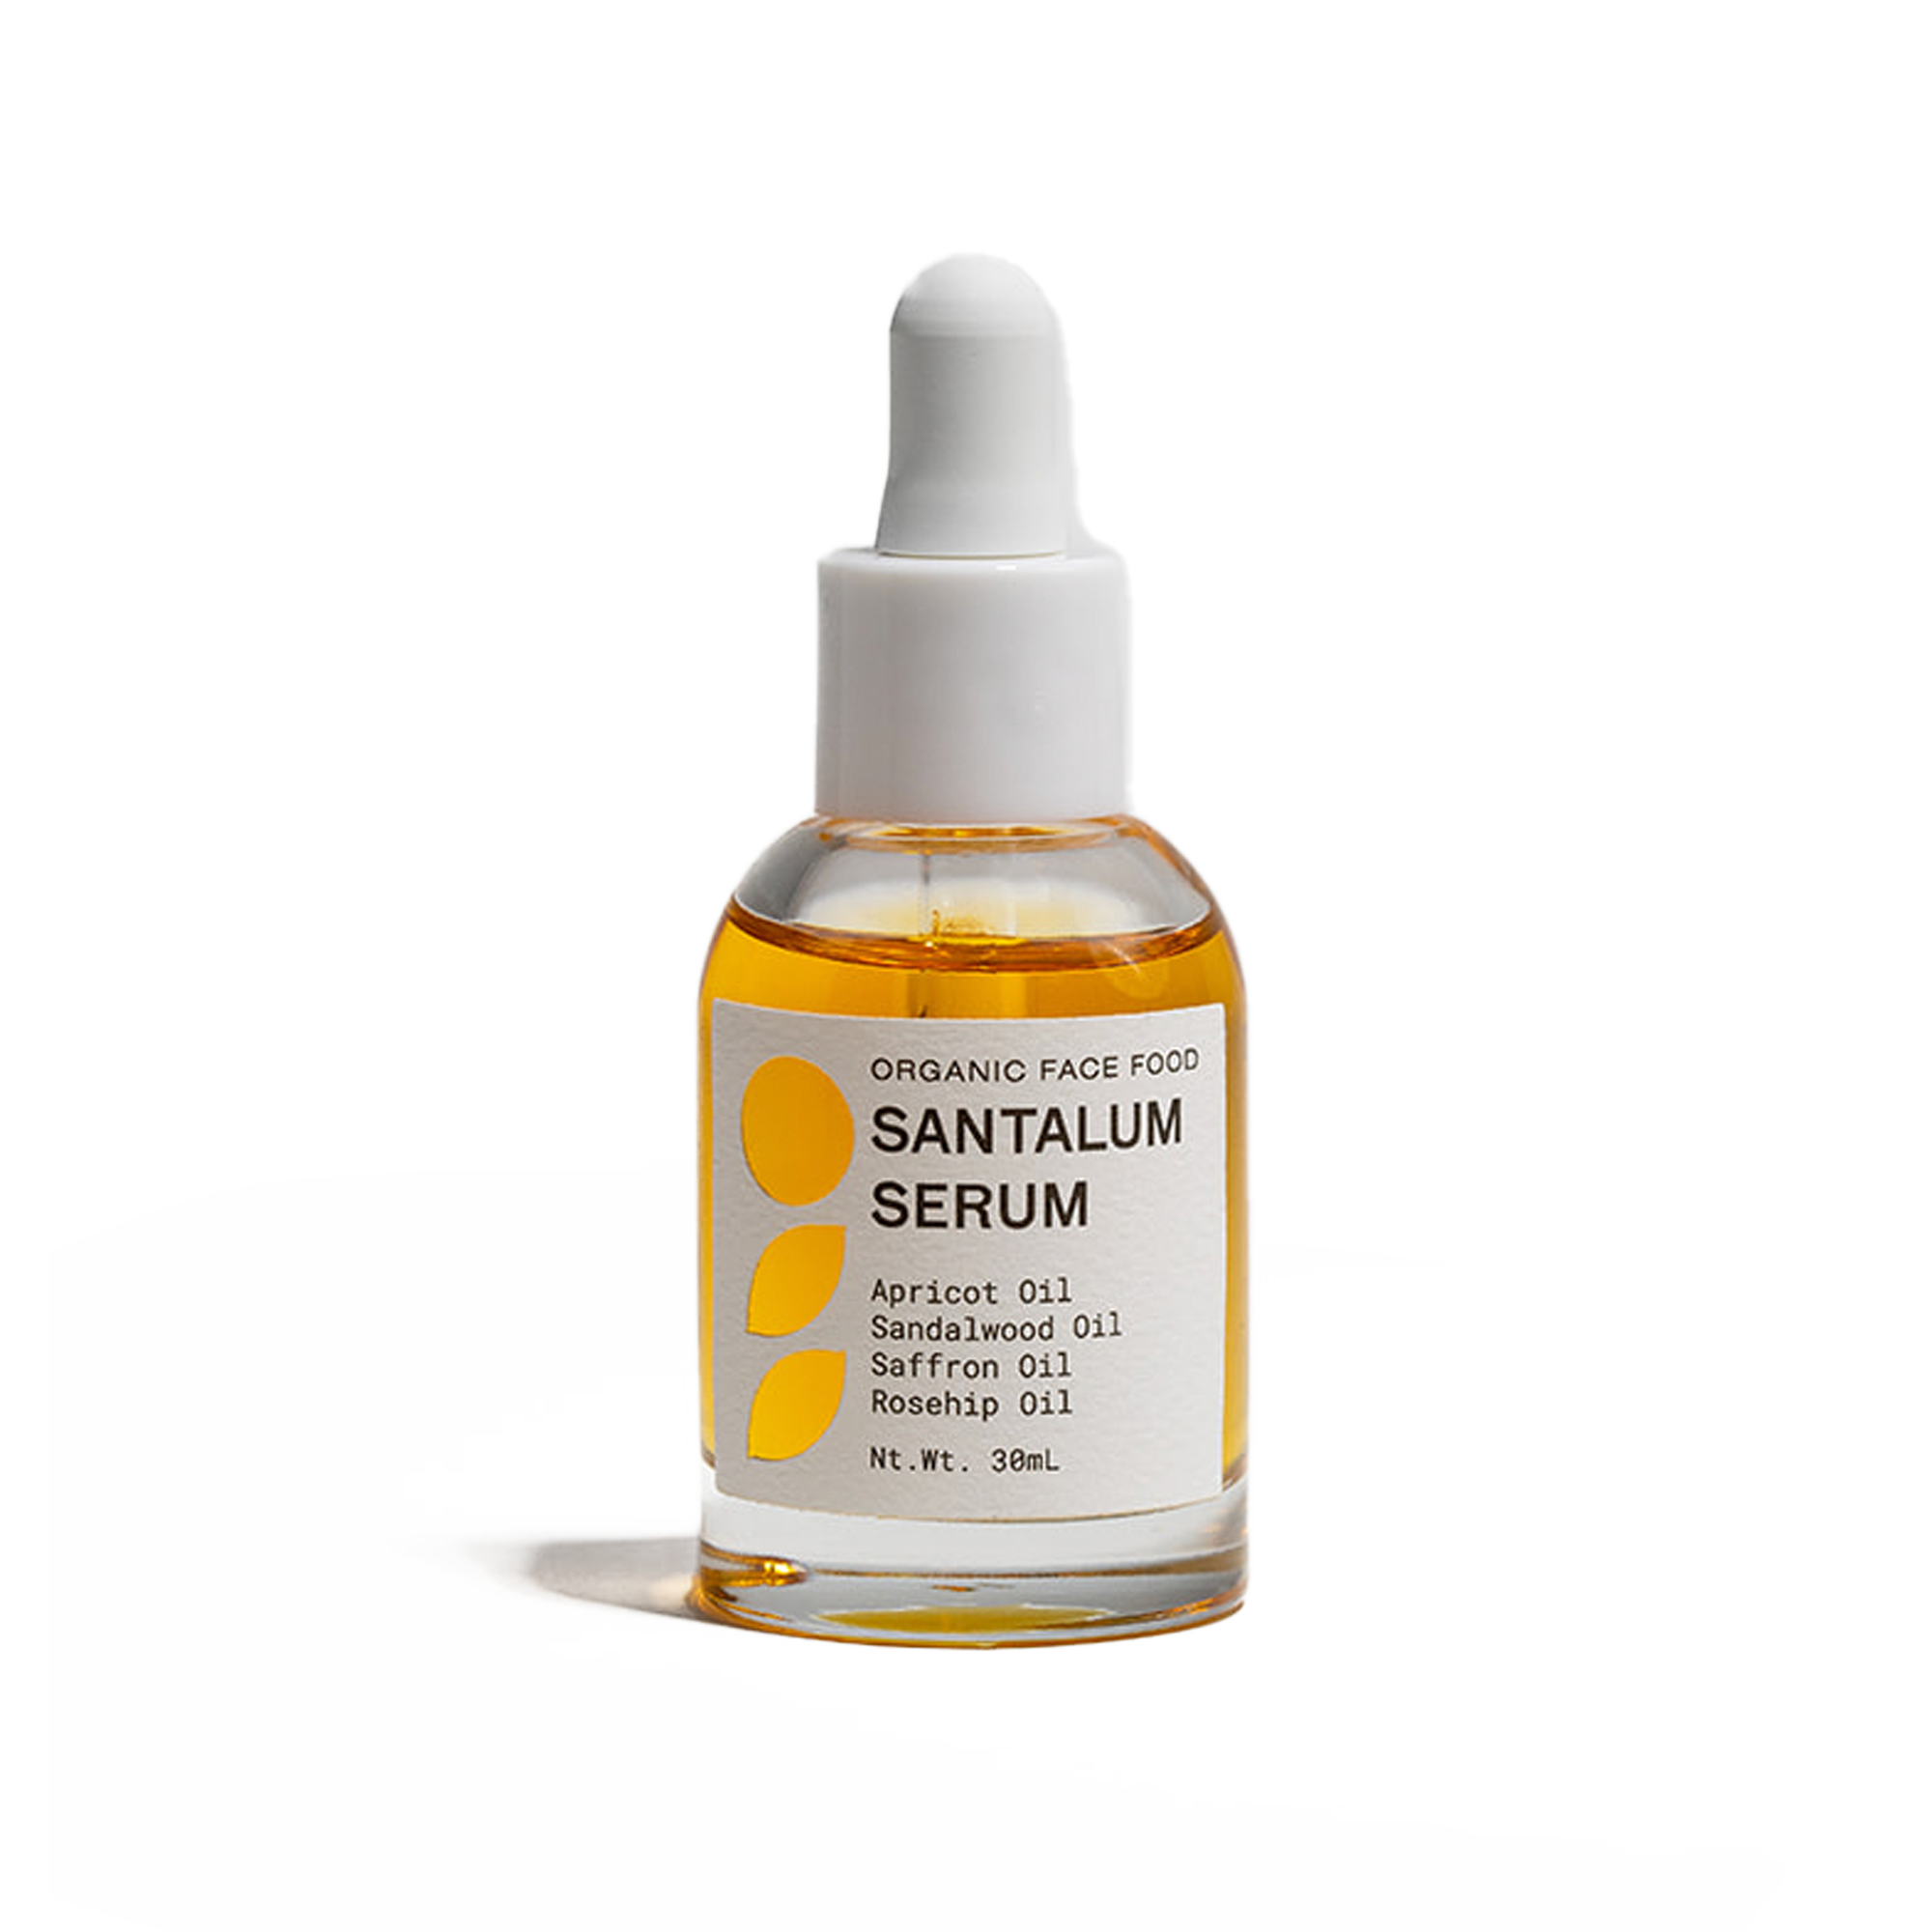 Santalum Serum | Naturally Radiant and Youthful Facial Oil Infused with Vitamins, Antioxidants and Omega-3 Fatty Acids